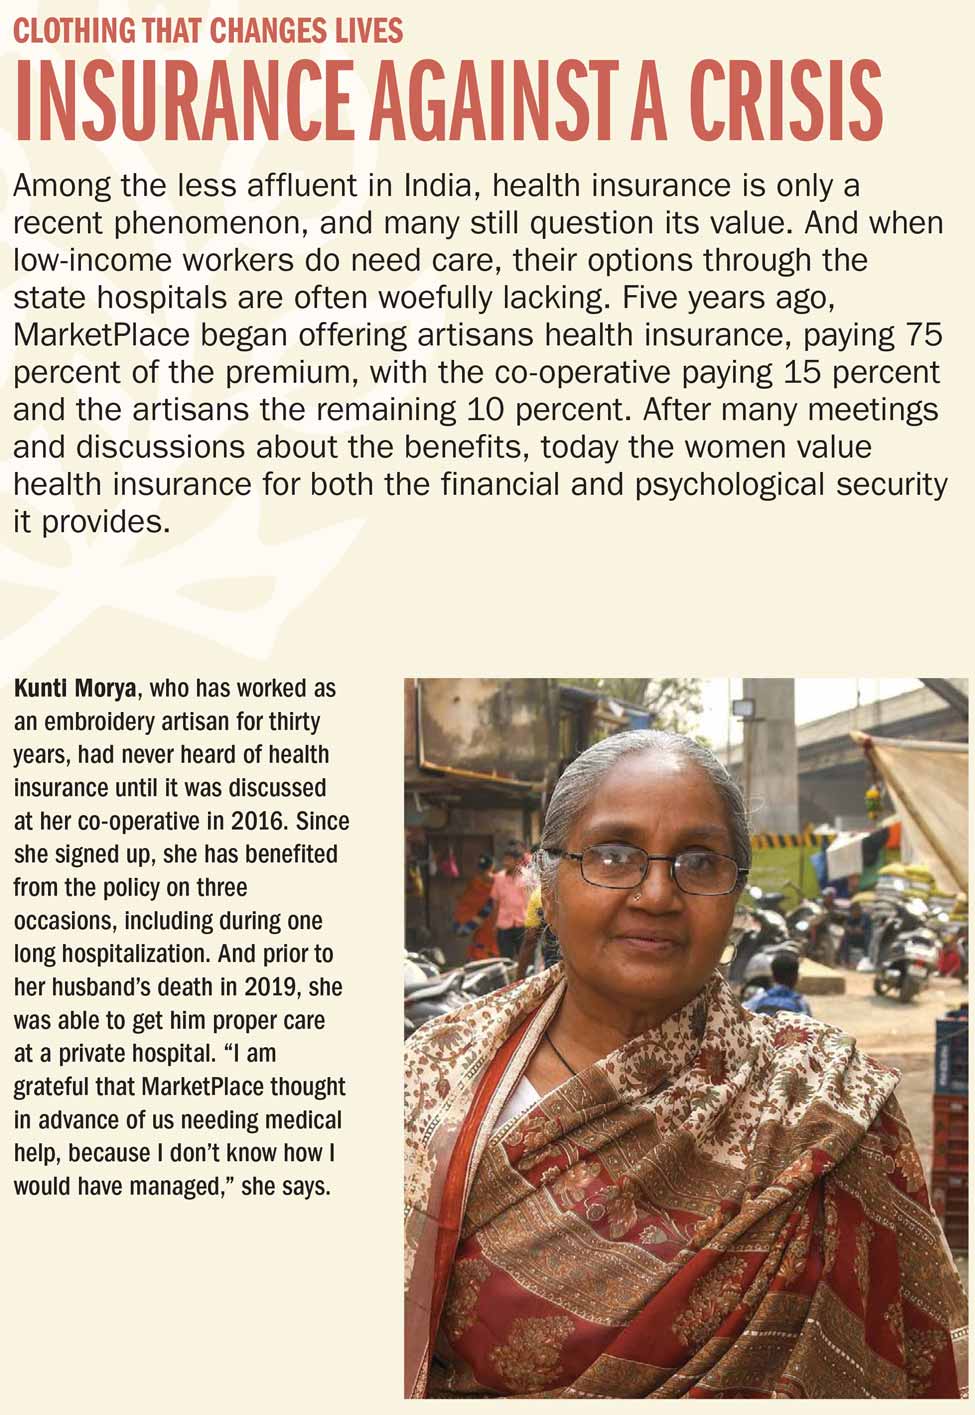 INSURANCE AGAINST A CRISIS Among the less affluent in India, health insurance is only a recent phenomenon, and many still question its value. And when low-income workers do need care, their options through the state hospitals are often woefully lacking. Five years ago, MarketPlace began offering artisans health insurance, paying 75 percent of the premium, with the co-operative paying 15 percent and the artisans the remaining 10 percent. After many meetings and discussions about the benefits, today the women value health insurance for both the financial and psychological security it provides. Kunti Morya, who has worked as an embroidery artisan for thirty years, had never heard of health insurance until it was discussed at her co-operative in 2016. Since she signed up, she has benefited from the policy on three occasions, including during one long hospitalization. And prior to her husband's death in 2019, she was able to get him proper care at a private hospital. 